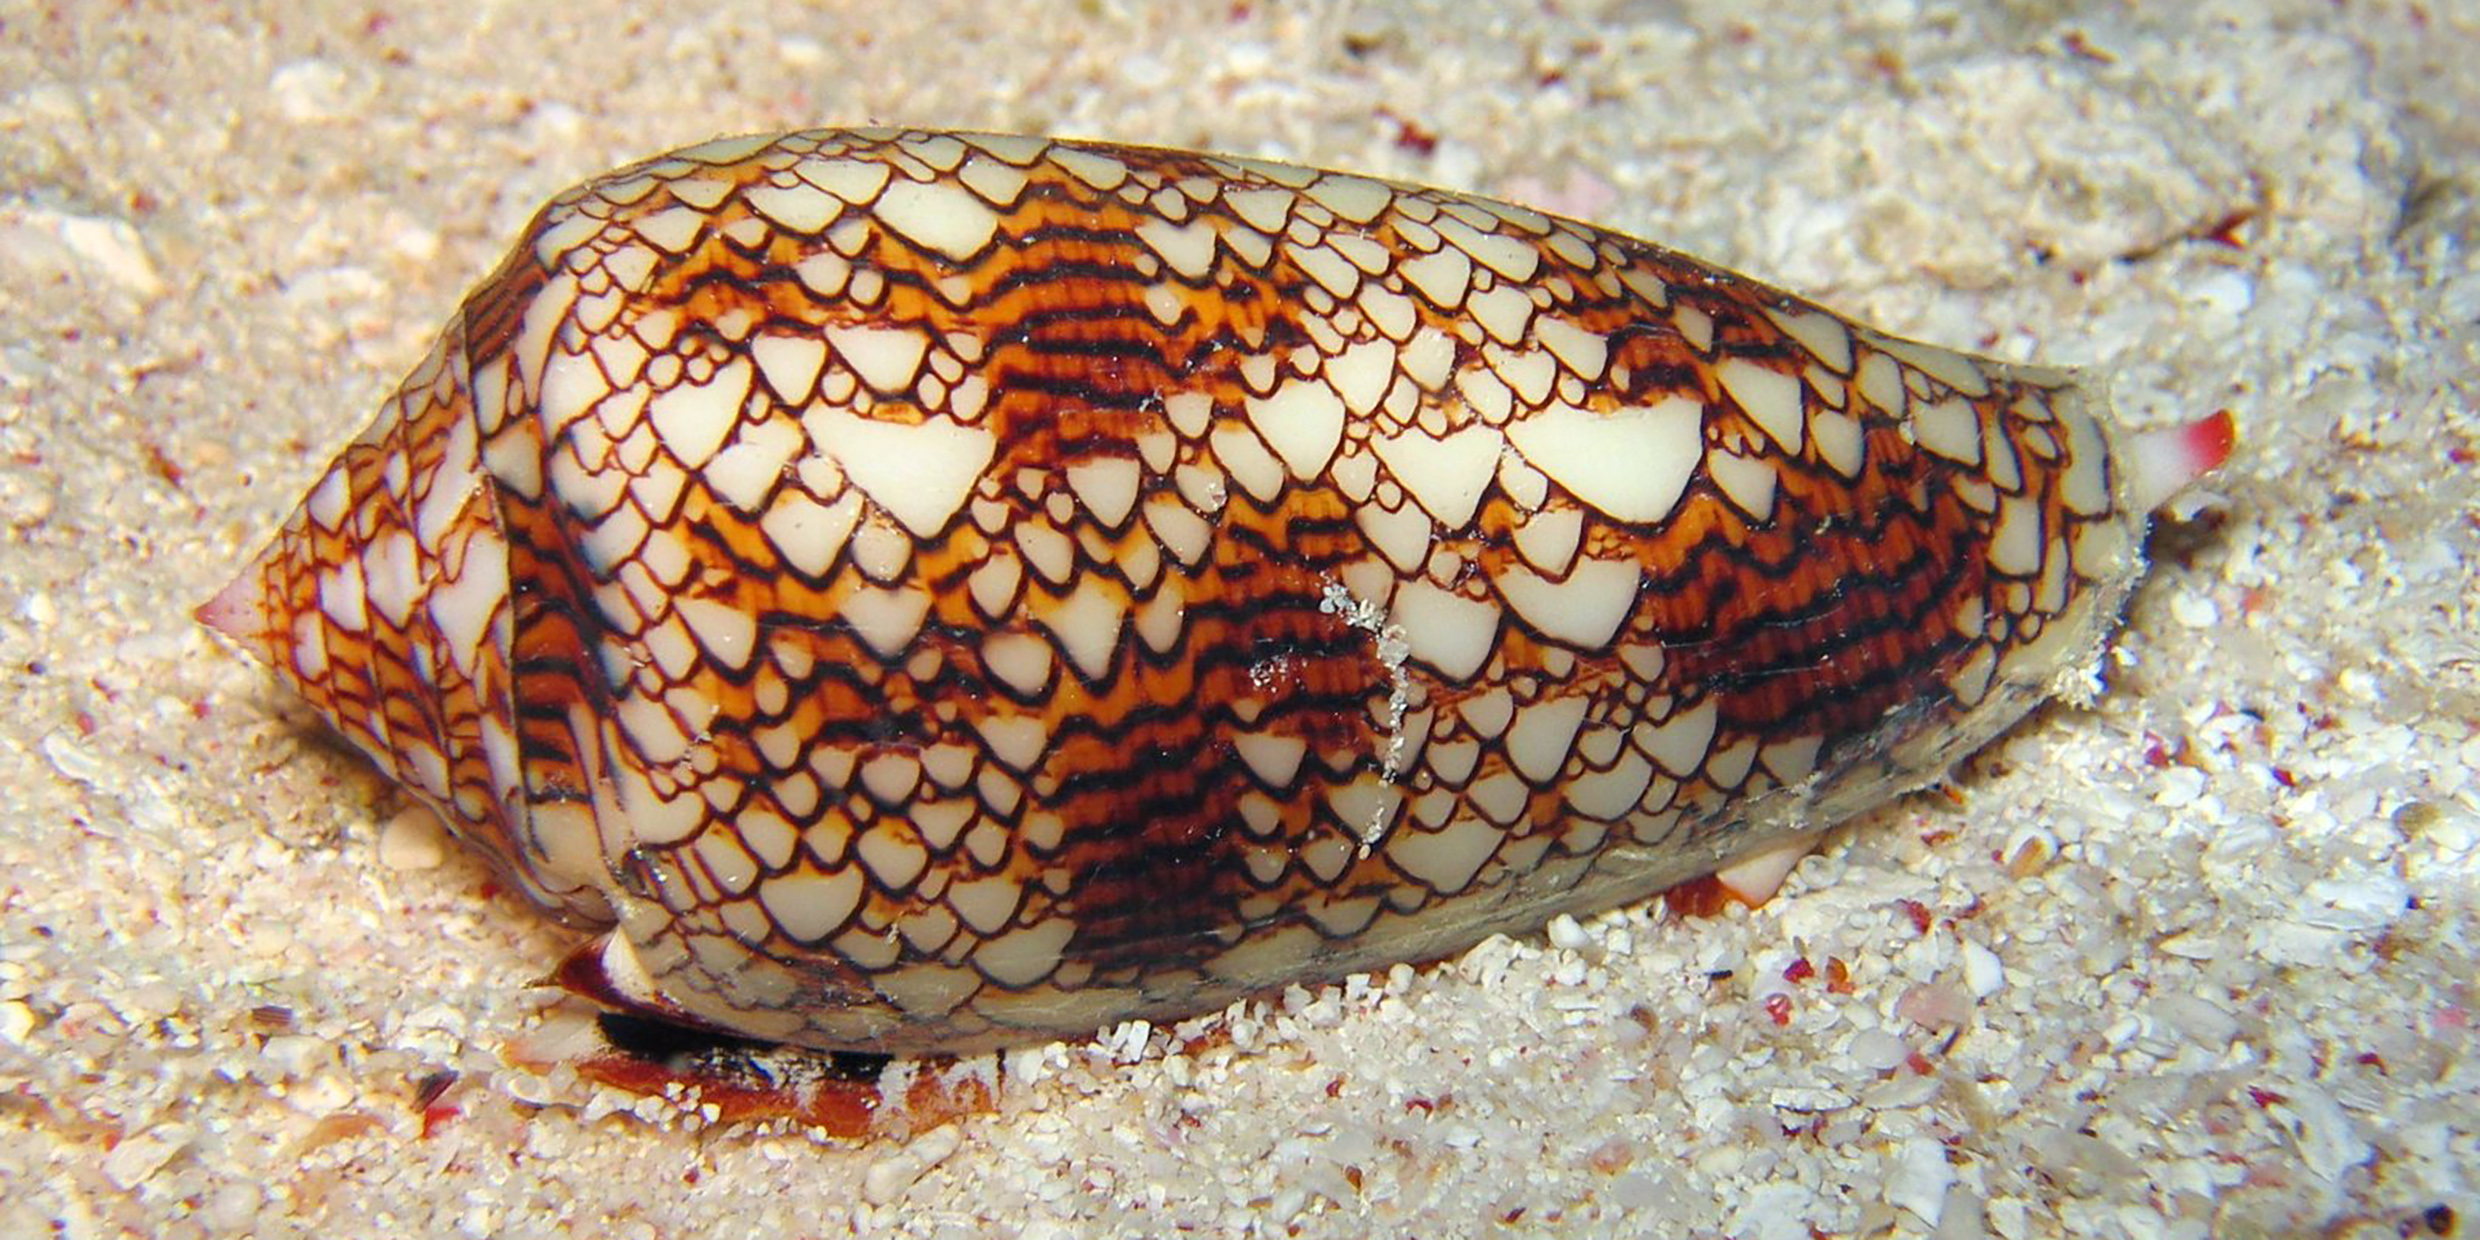 Image of a intricately patterned snail shell resting on the ocean floor